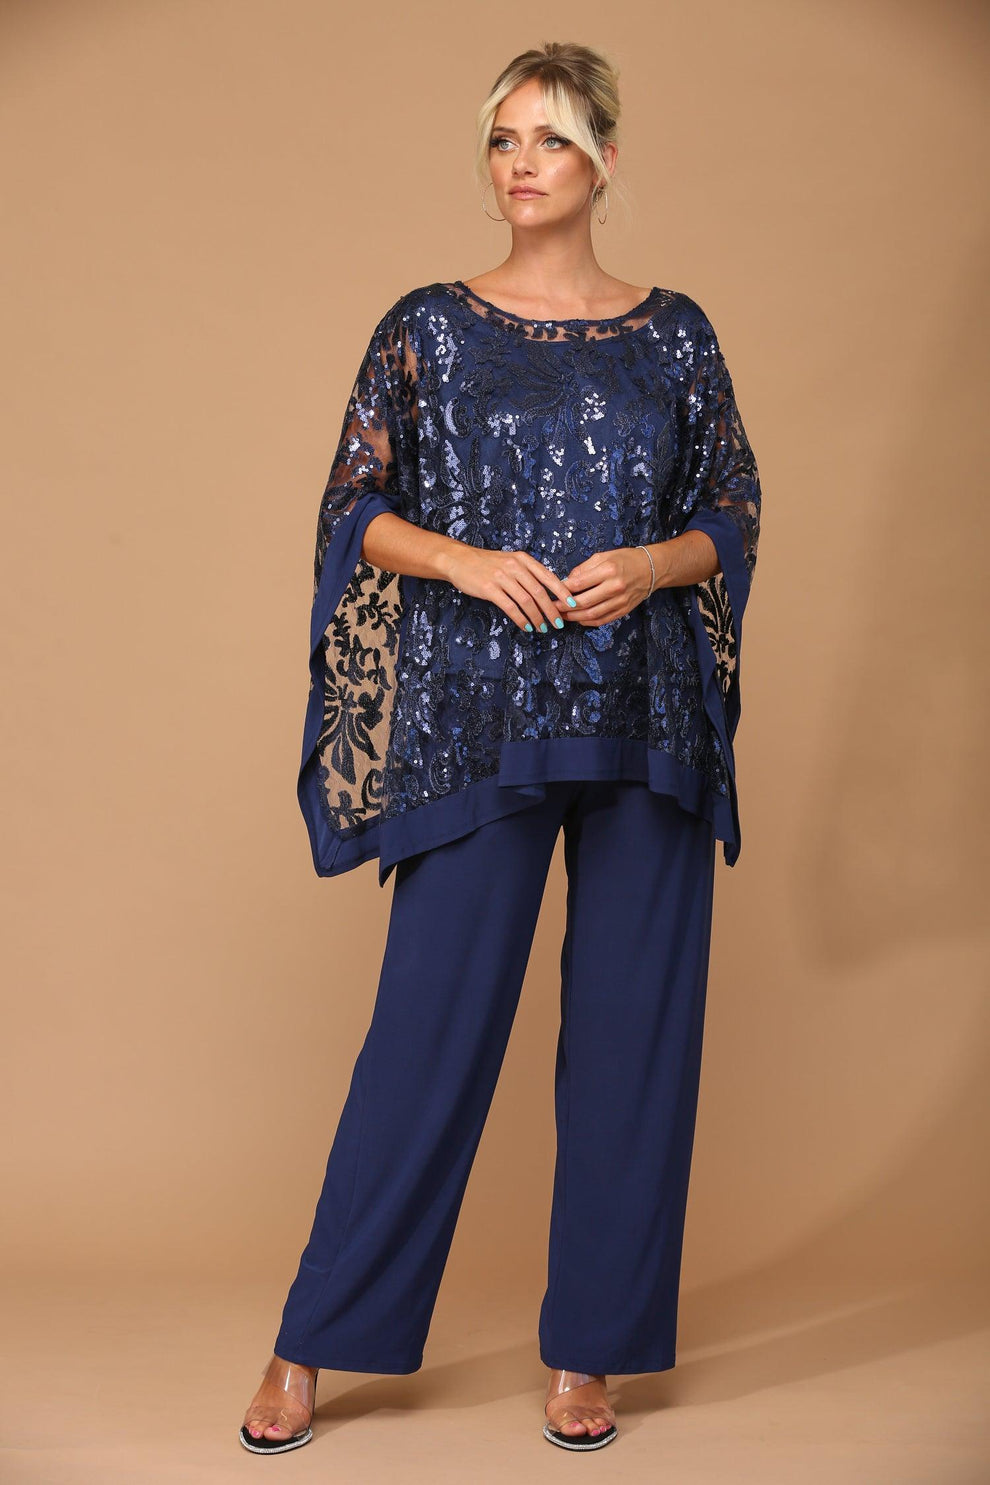 Long Formal Mother of the Bride Cape Pant Set for $89.99 – The Dress Outlet